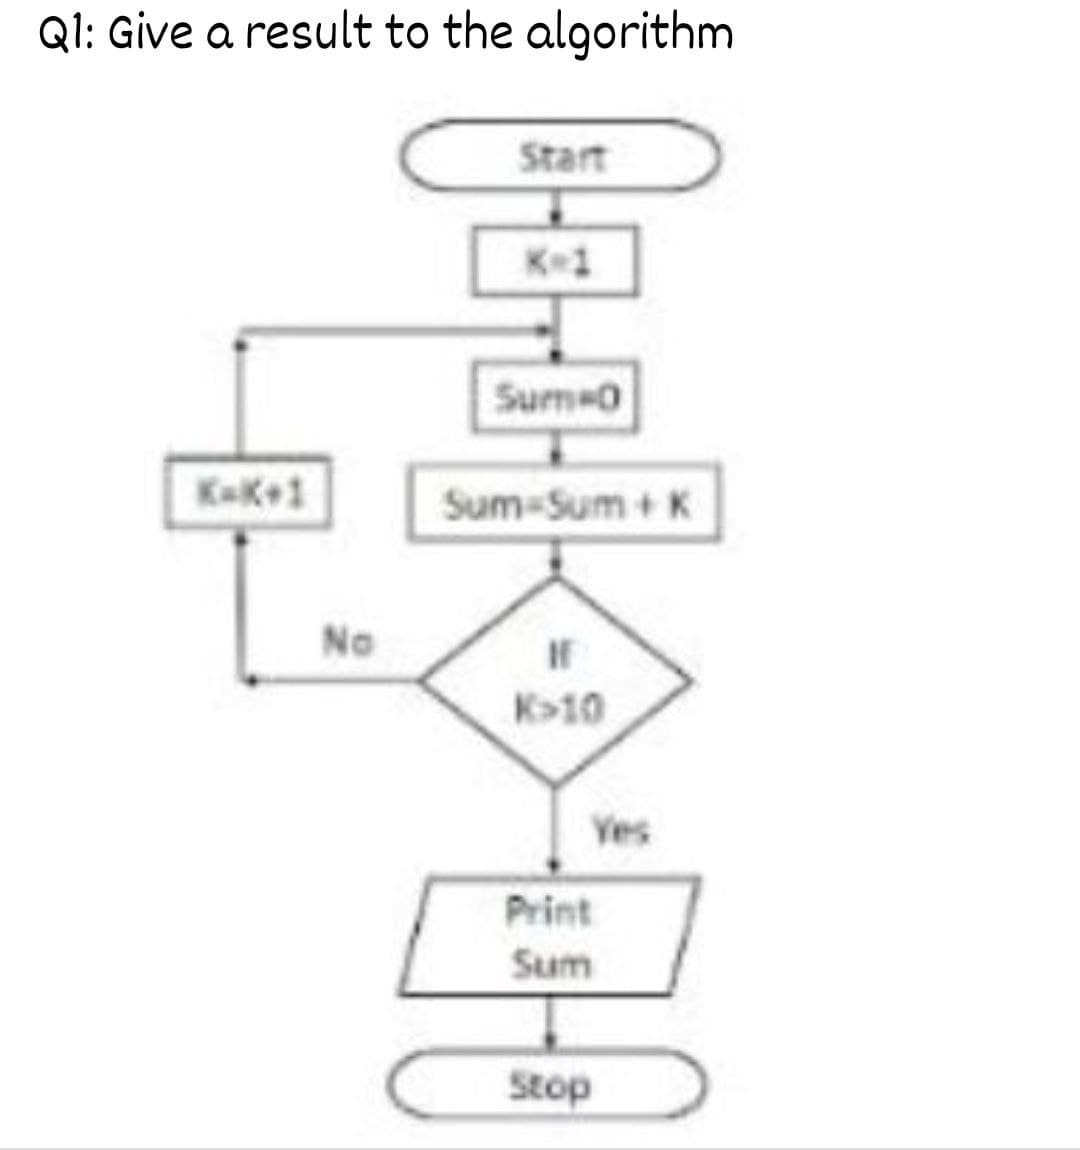 QI: Give a result to the algorithm
Start
K1
Sum0
KK+1
Sum-Sum + K
No
If
K>10
Yes
Print
Sum
Stop
